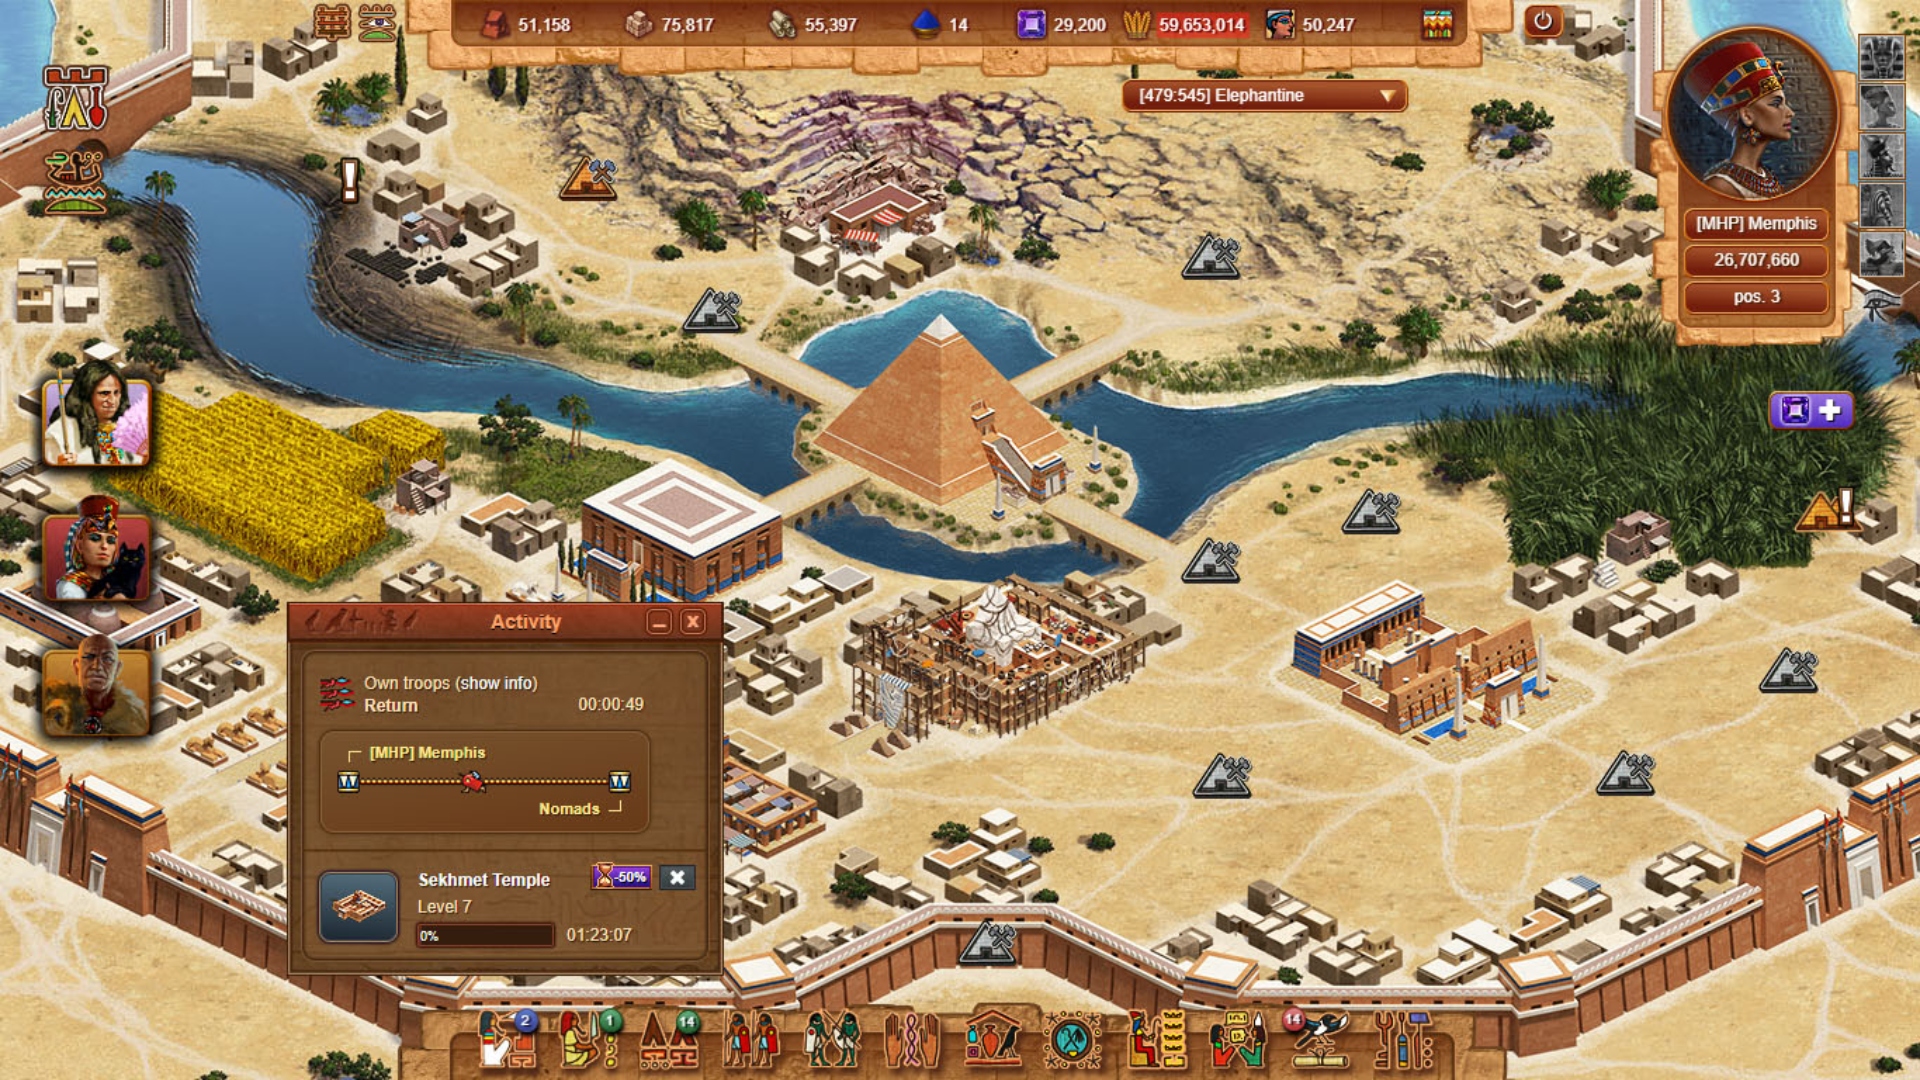 Best online games: The game board for Anocris